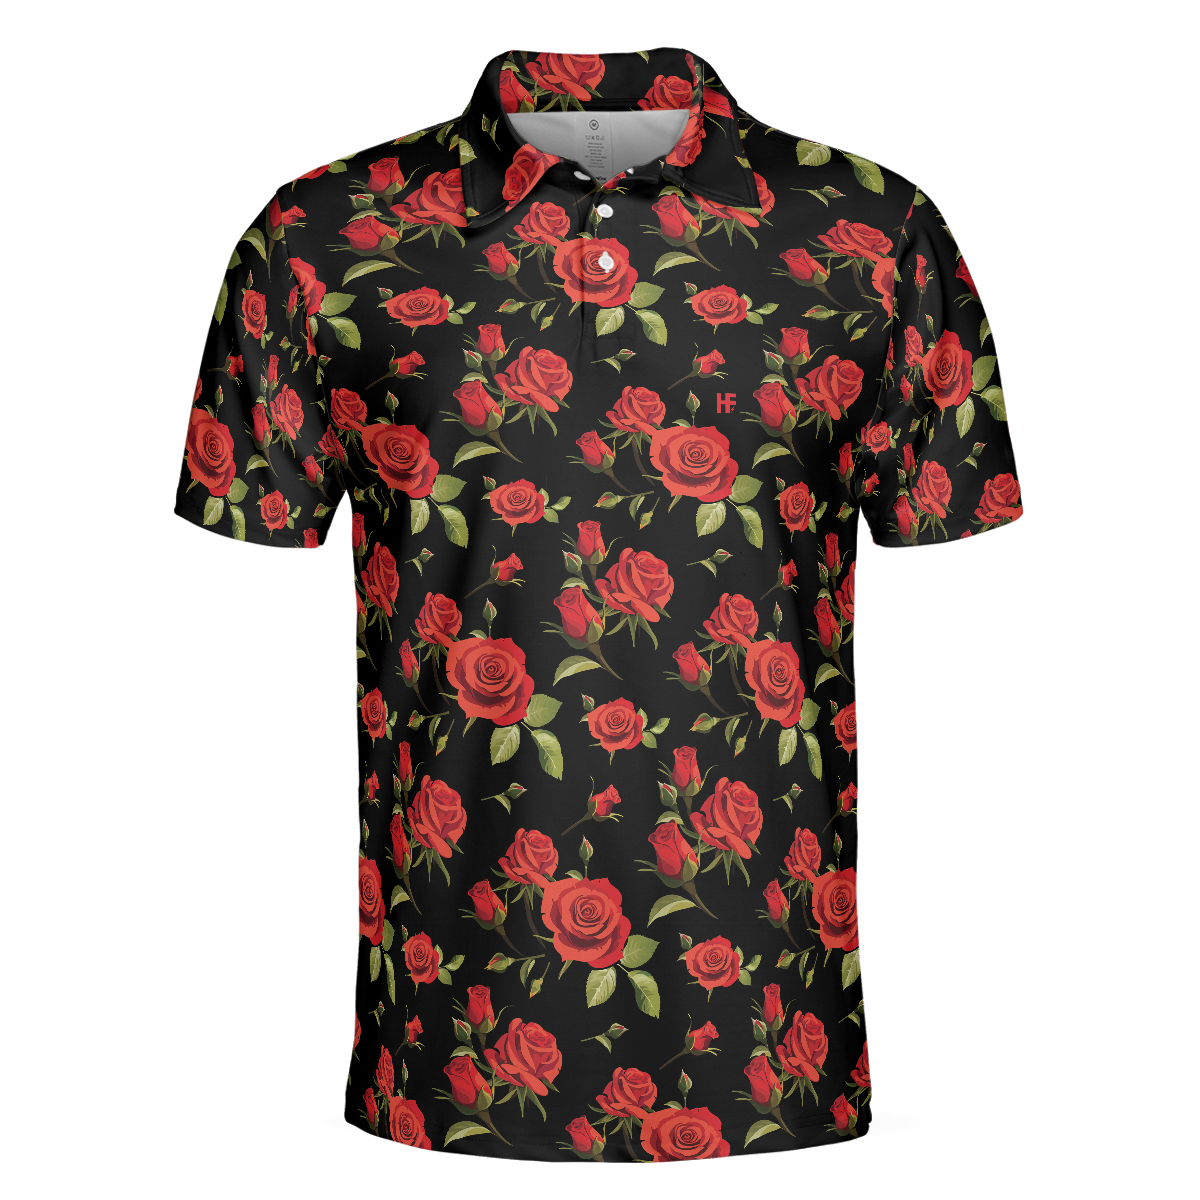 Red Roses Polo Shirt Red Roses Seamless Pattern Shirt For Adults Best Rose Themed Gift Idea For Rose Fans - 3